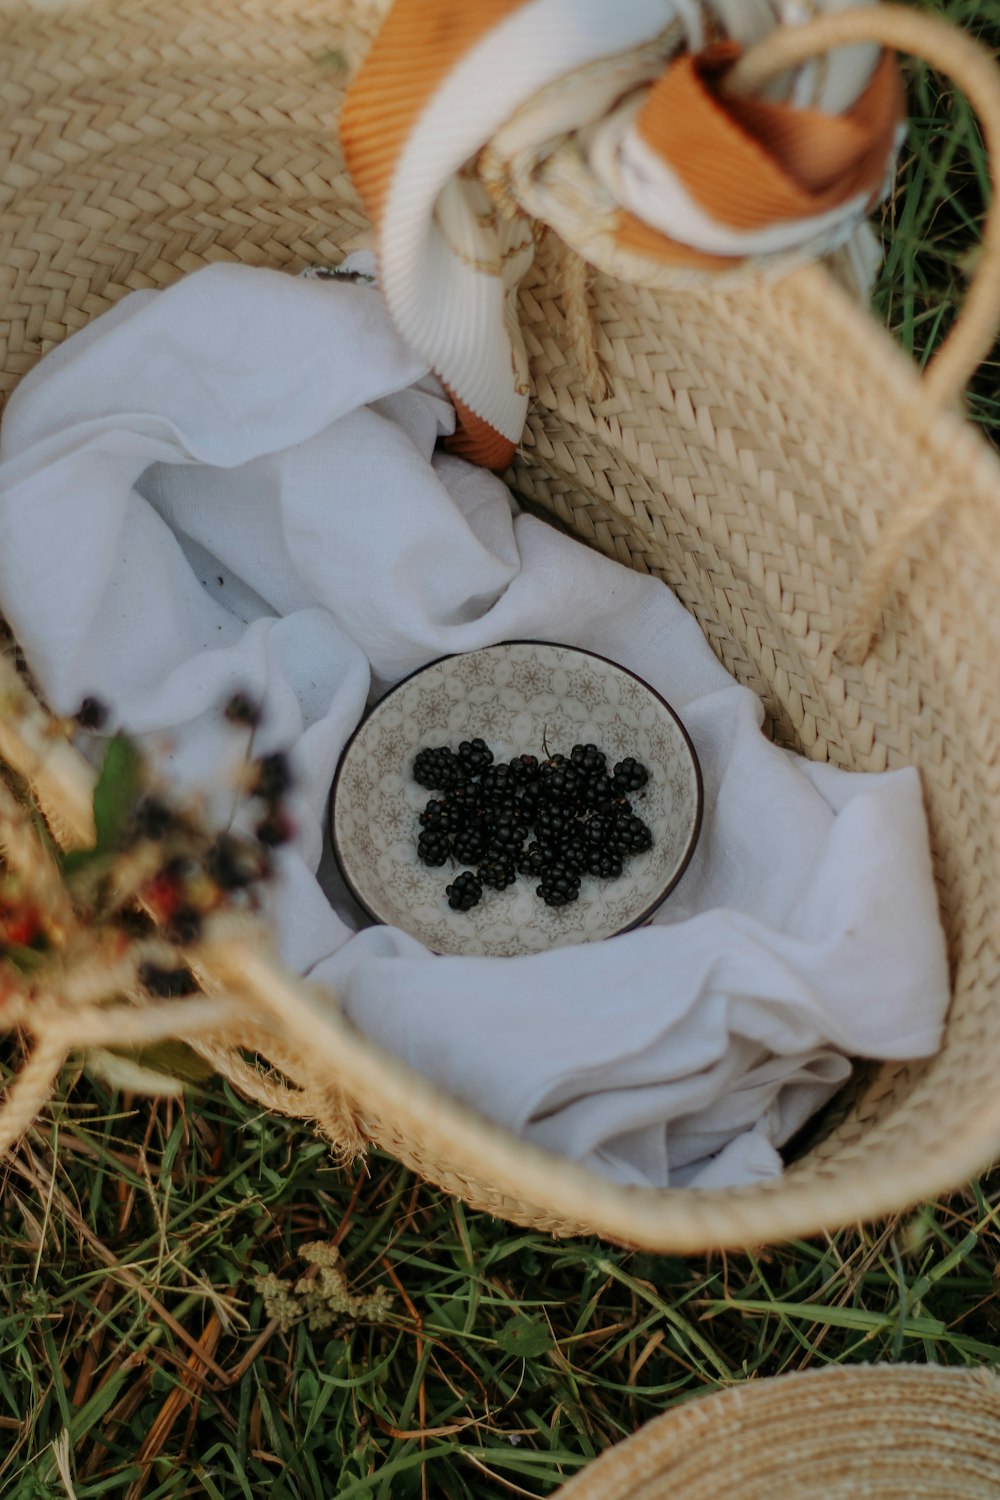 a basket filled with a white cloth and some black beads